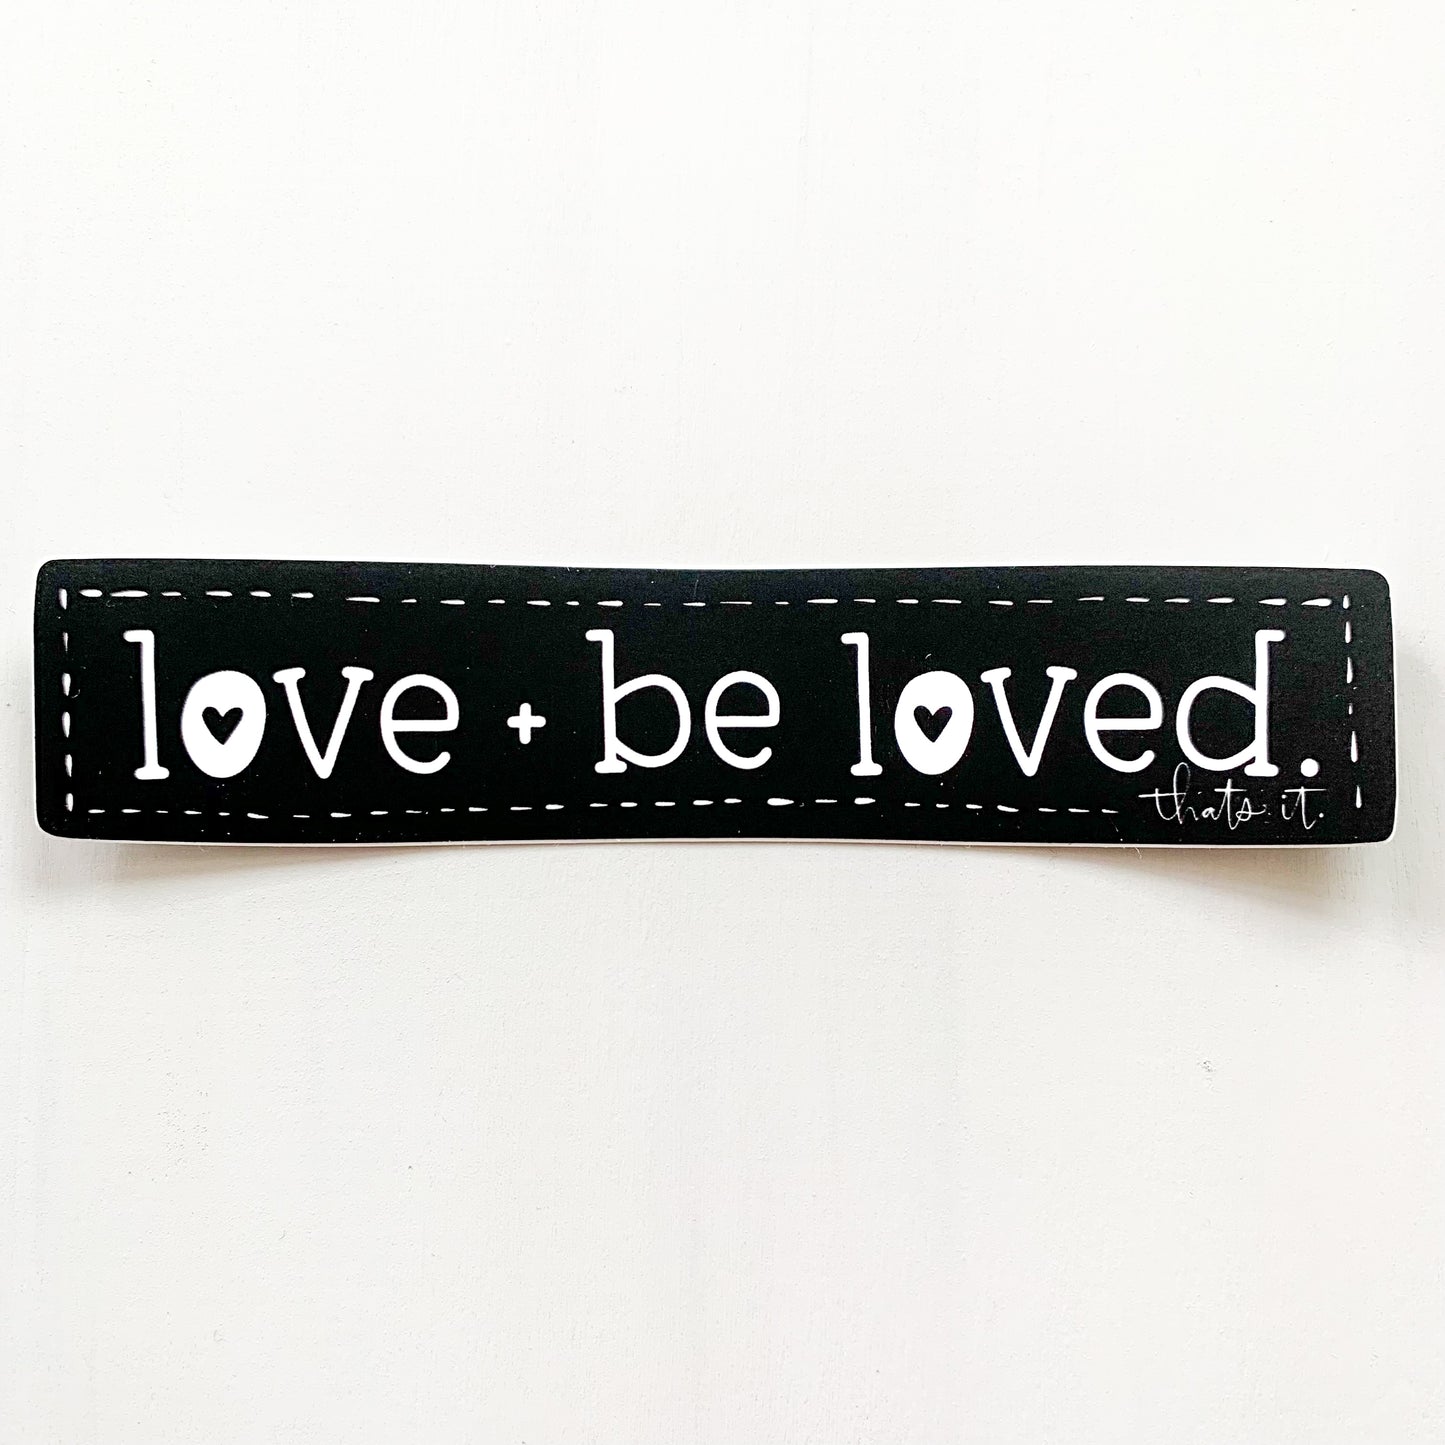 Love + be loved. That’s it. — Sticker